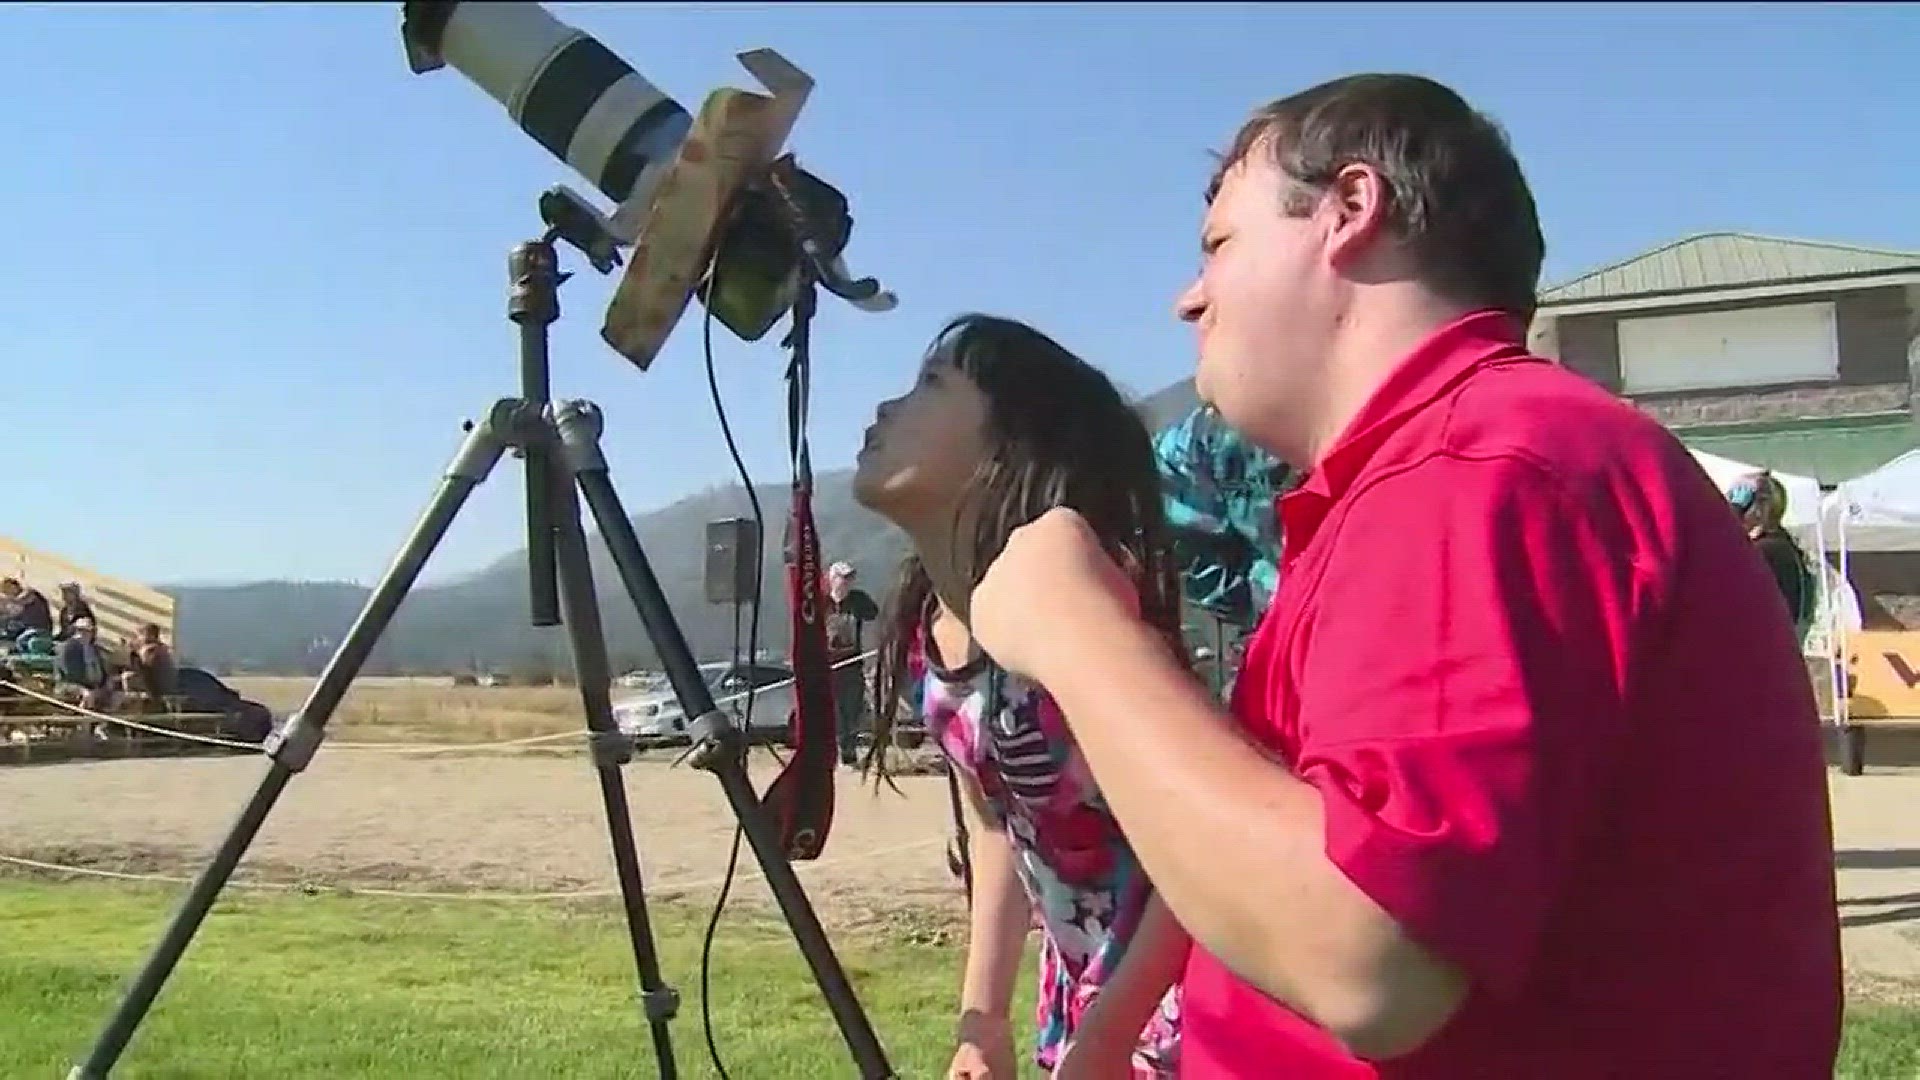 'It was magical:' Scientist travels to Idaho to witness total solar eclipse